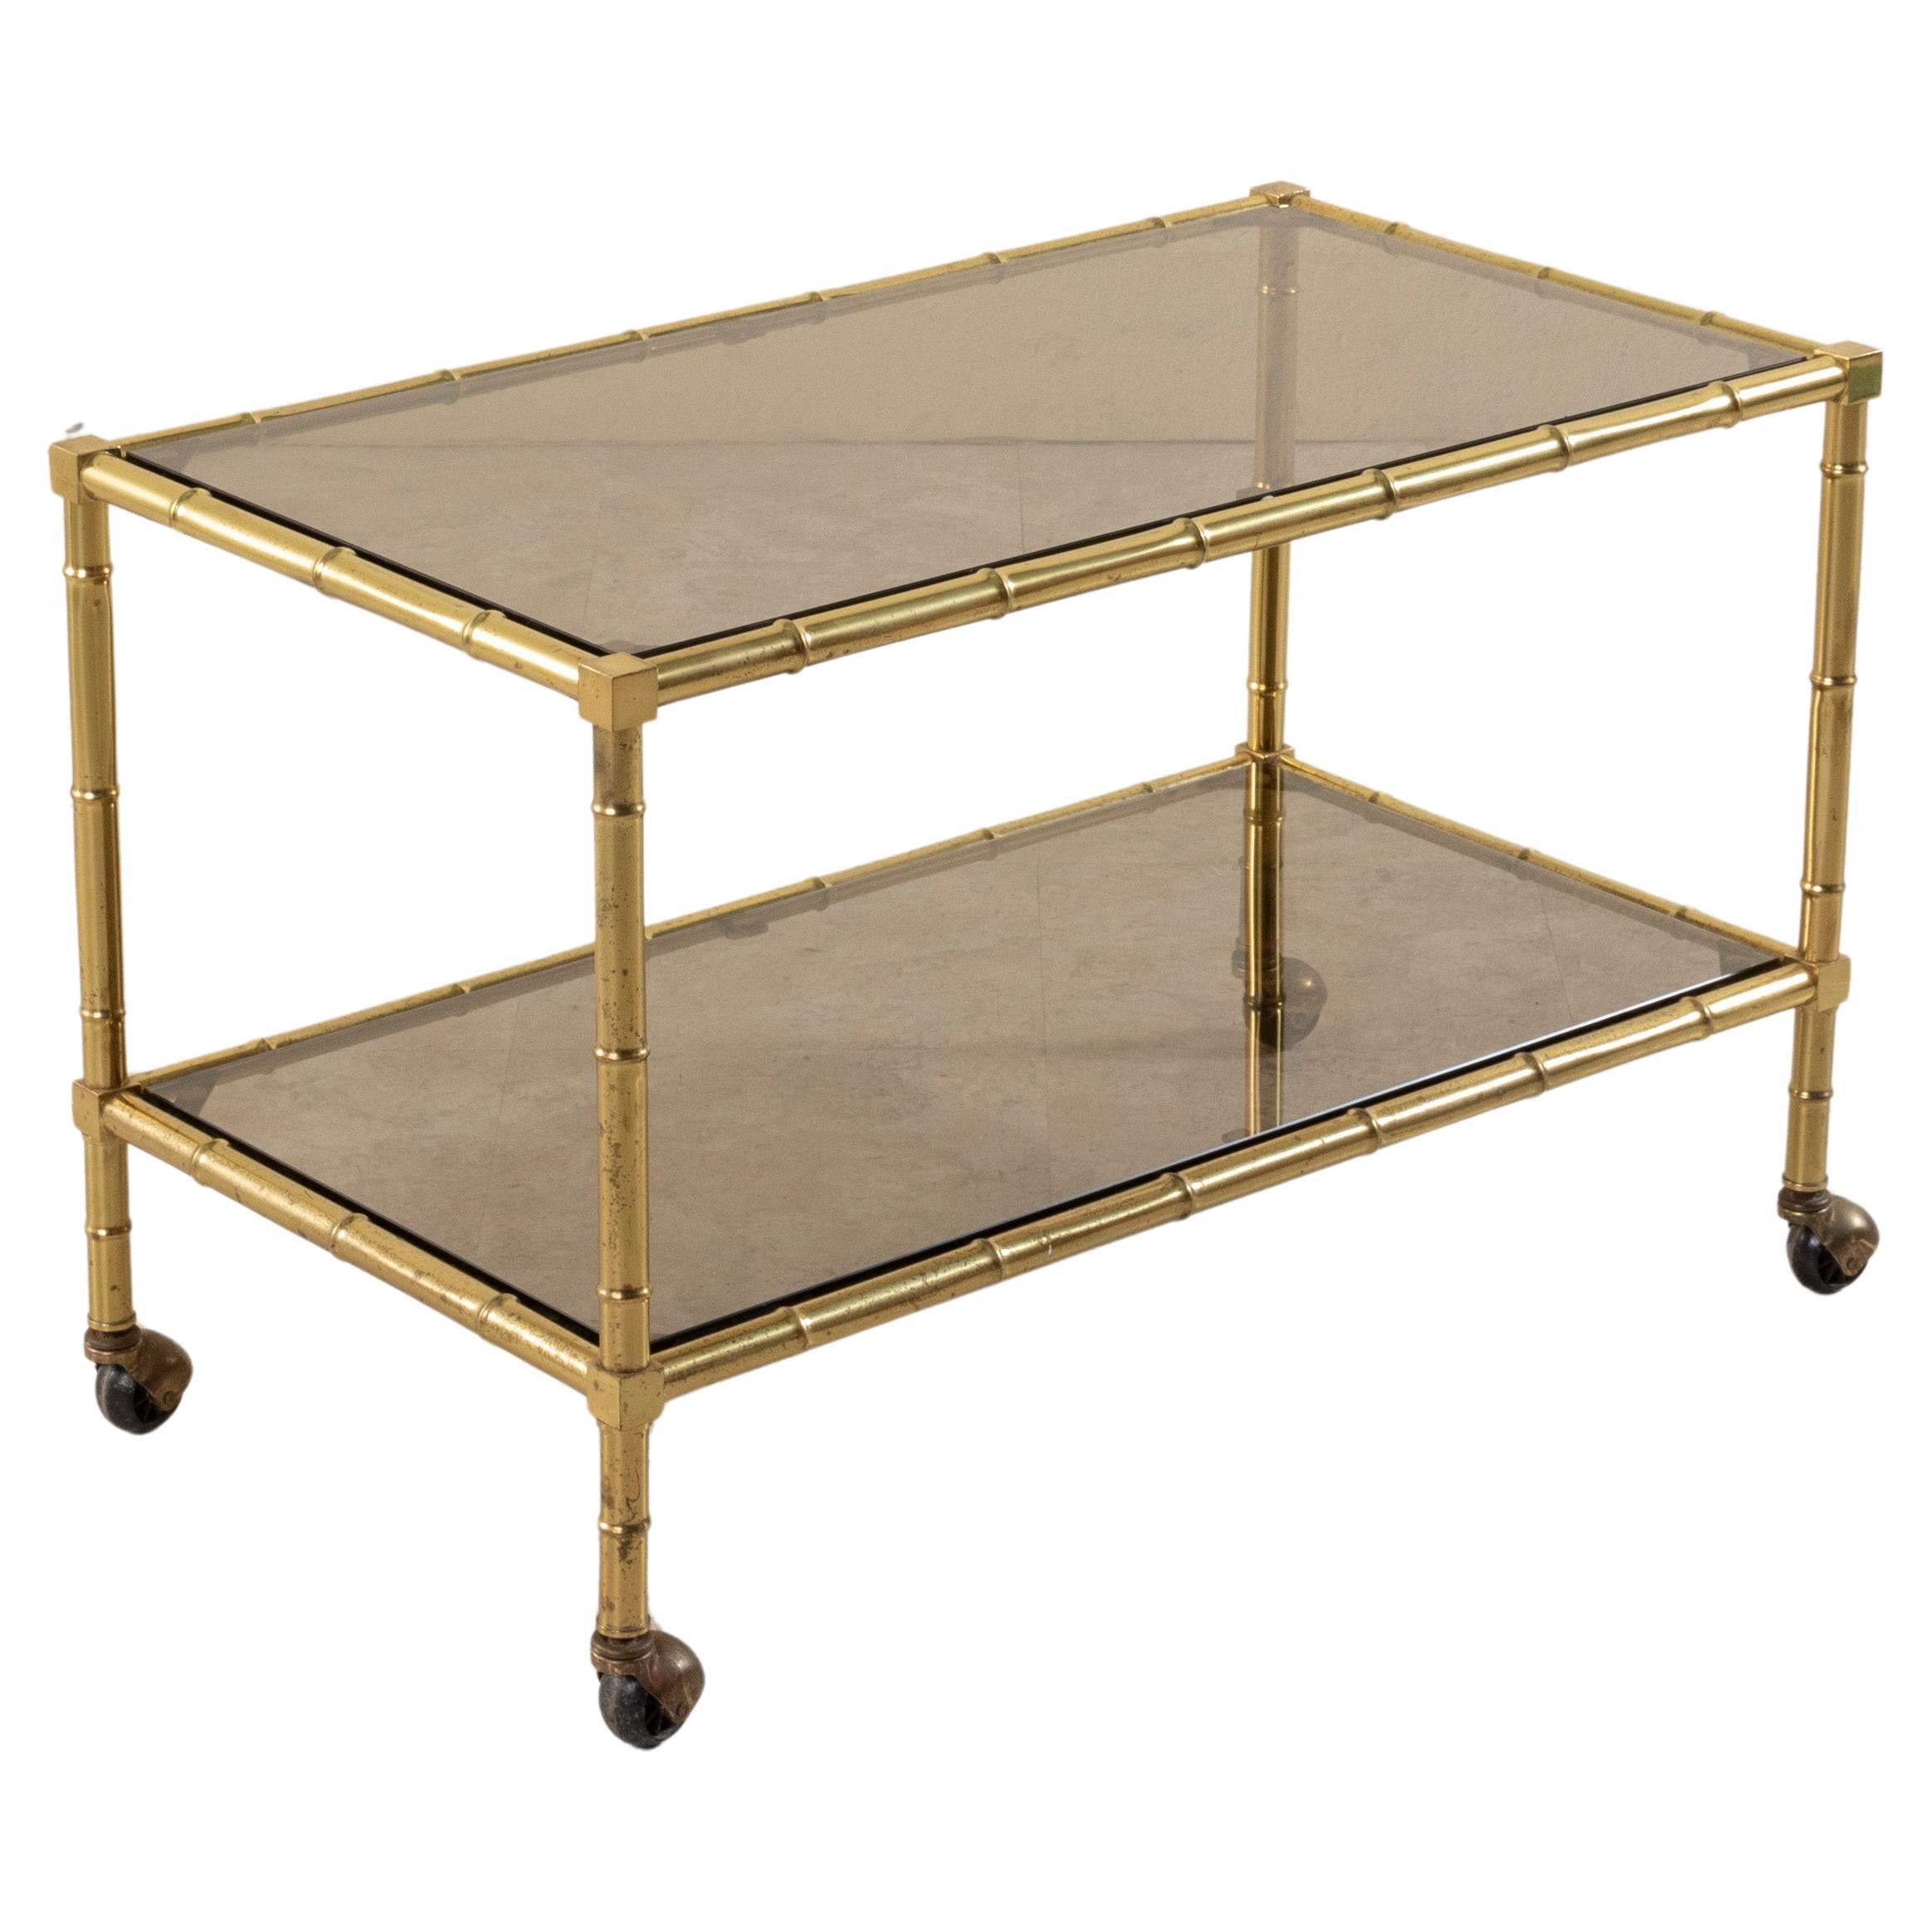 Mid-20th Century French Faux Bamboo Brass and Smoked Glass Coffee Table Bar Cart For Sale